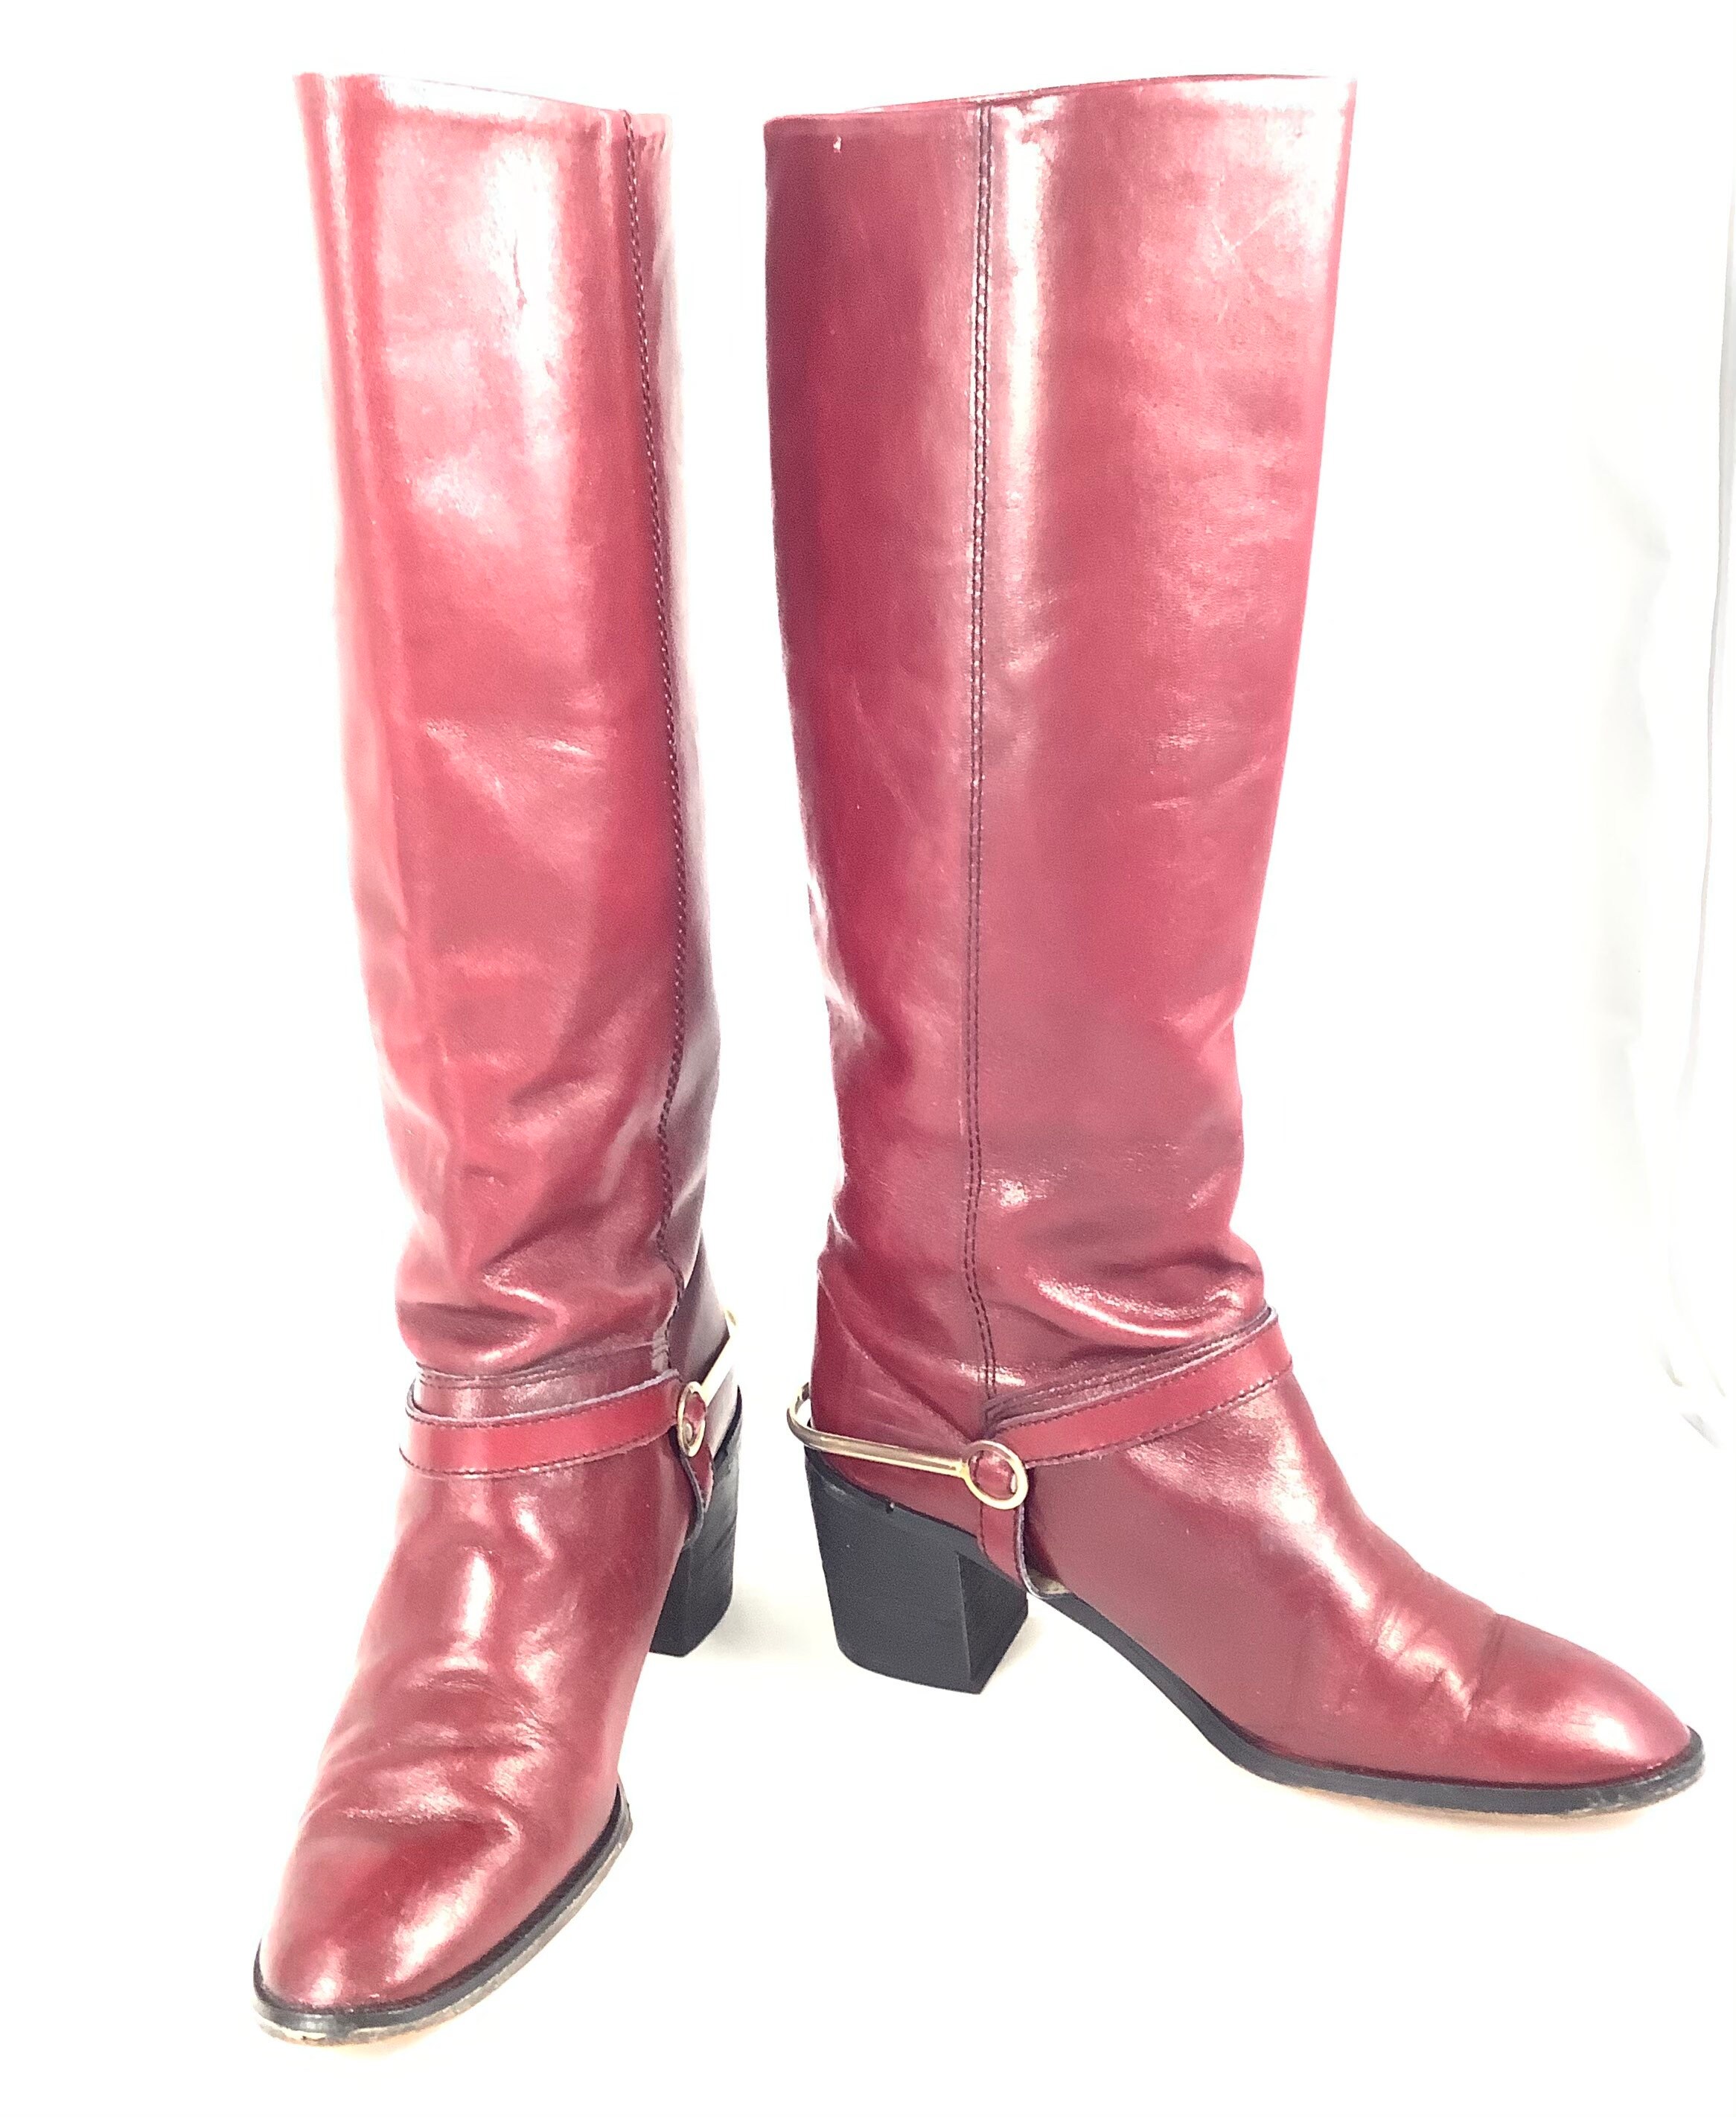 Gods Ældre borgere by Vintage Etienne Aigner Riding Boots Burgundy Leather Oxblood | Etsy Canada